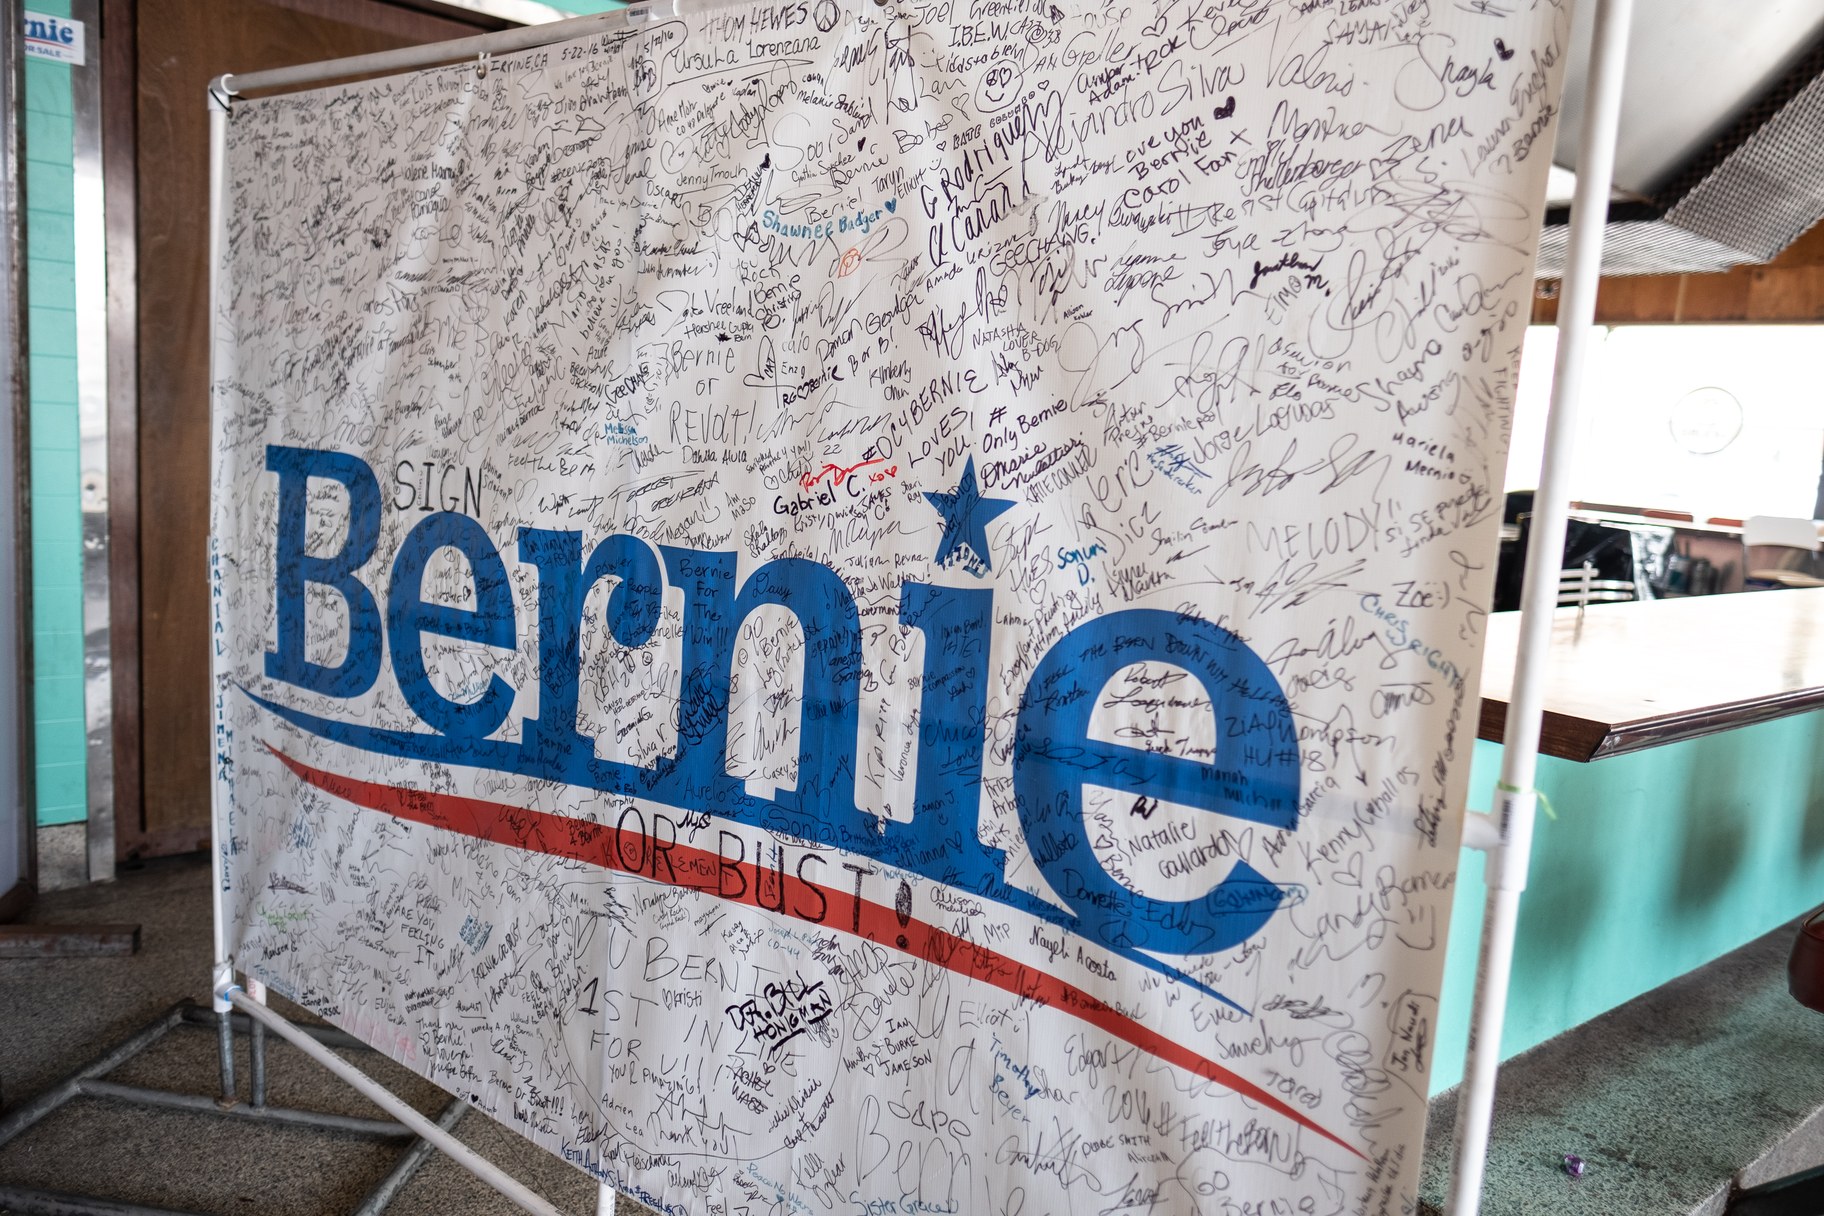 Johnnie’s became a phone banking center for Bernie Sanders’ 2016 campaign. Hundreds of volunteers piled into the old vinyl booths to make calls asking voters to support the Vermont senator’s bid for the Democratic nomination